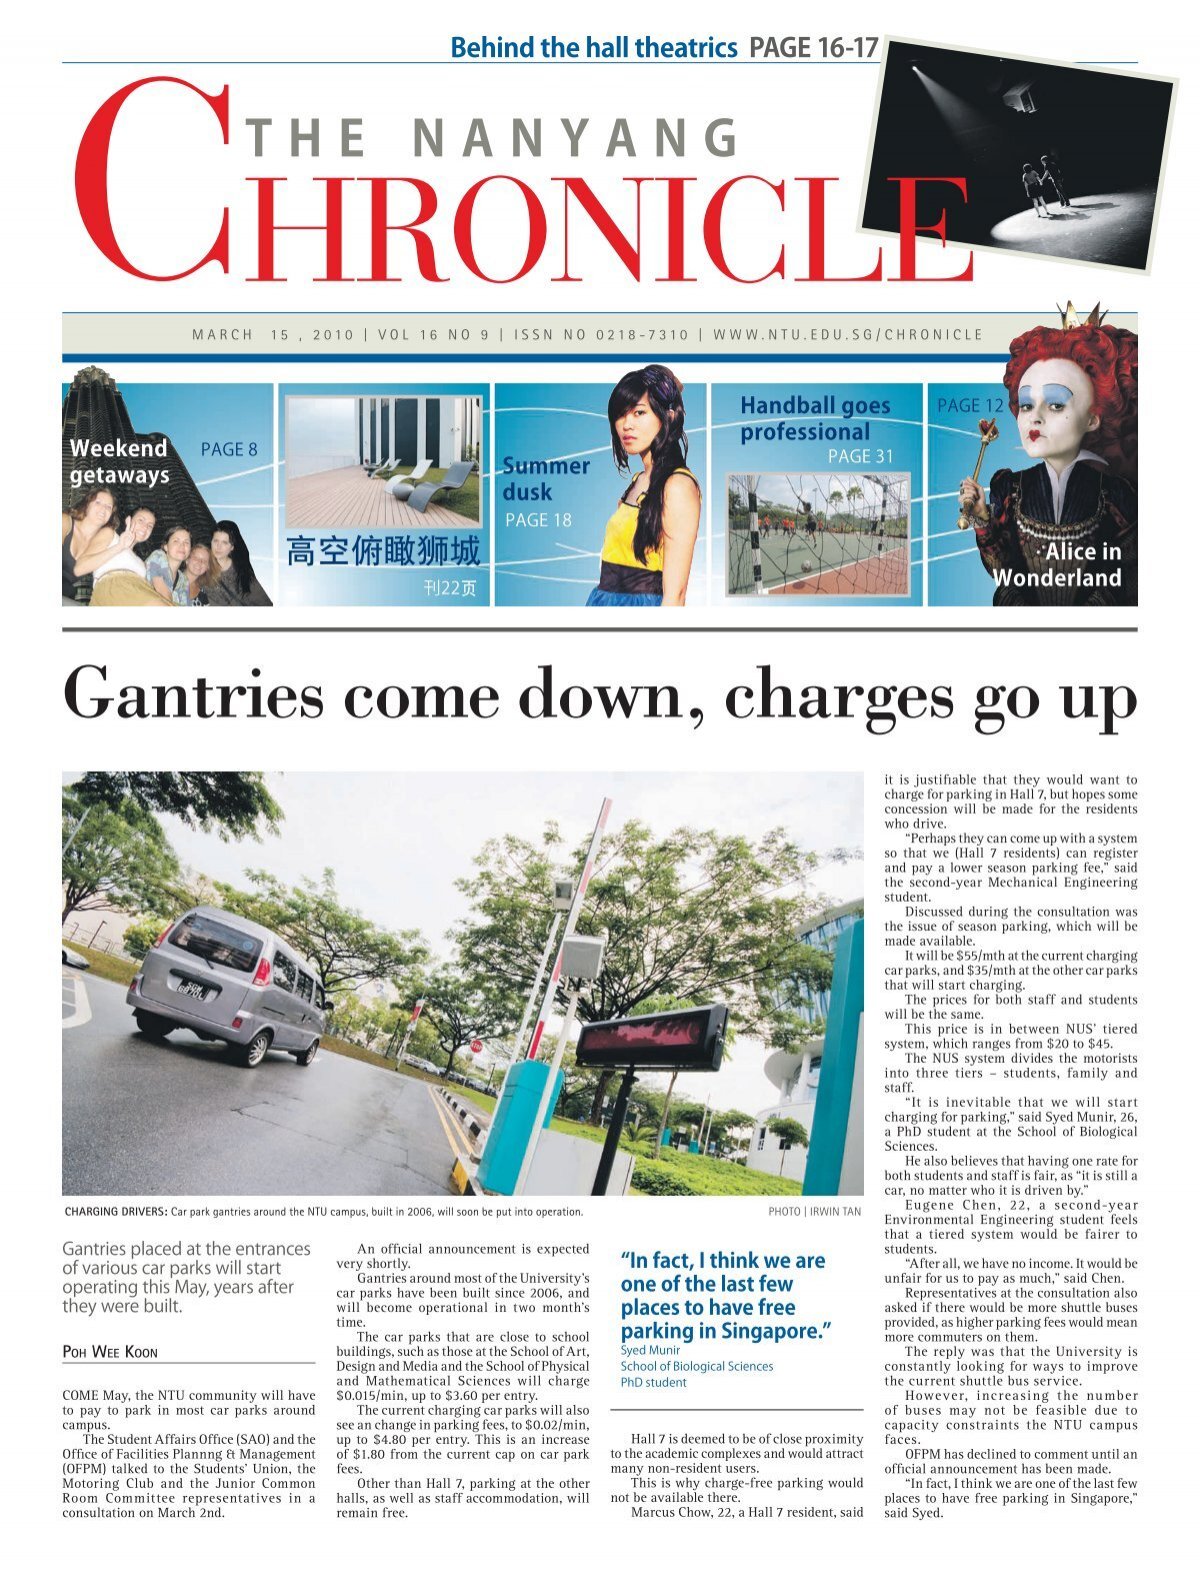 Gantries come down, charges go up - Nanyang Technological